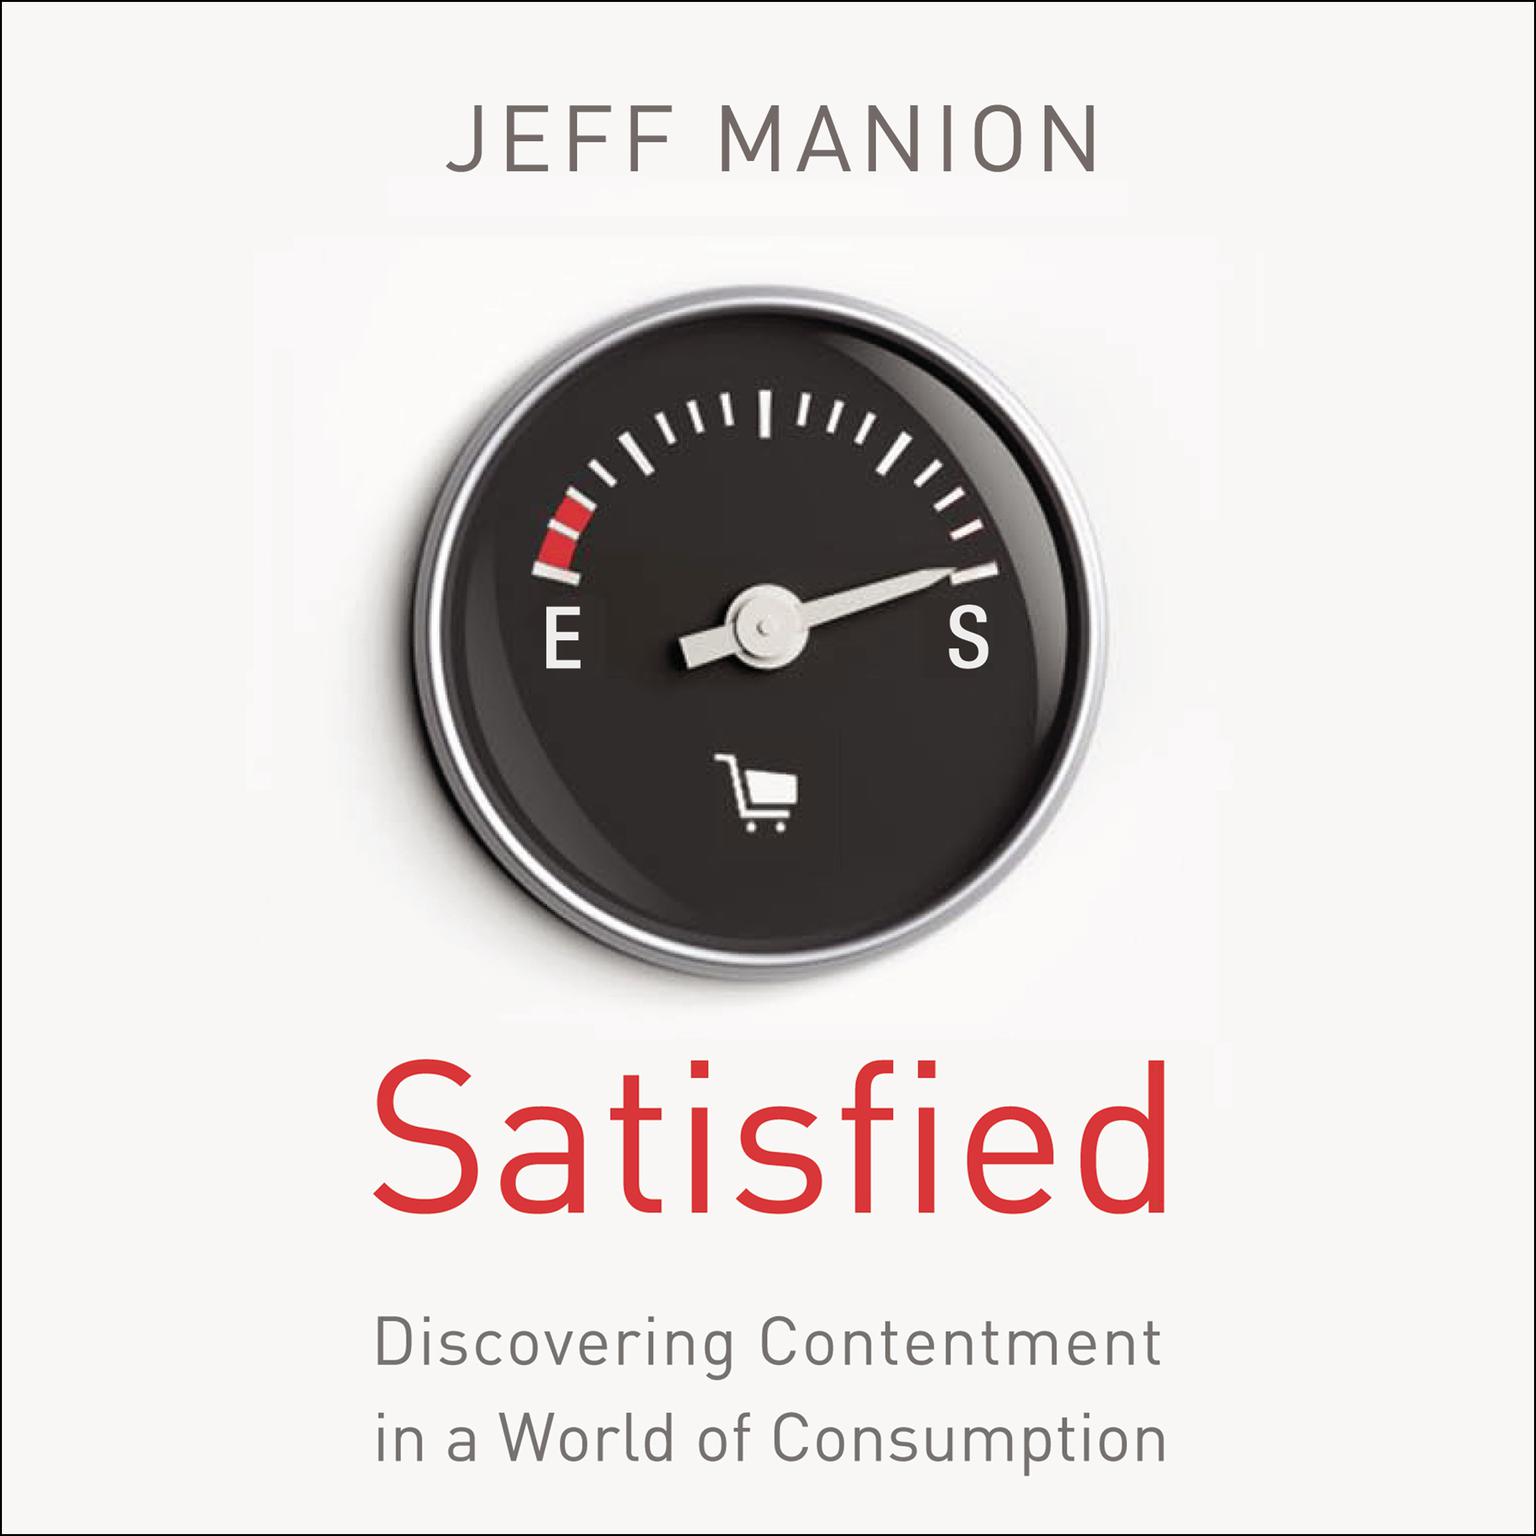 Satisfied: Discovering Contentment in a World of Consumption Audiobook, by Jeff Manion